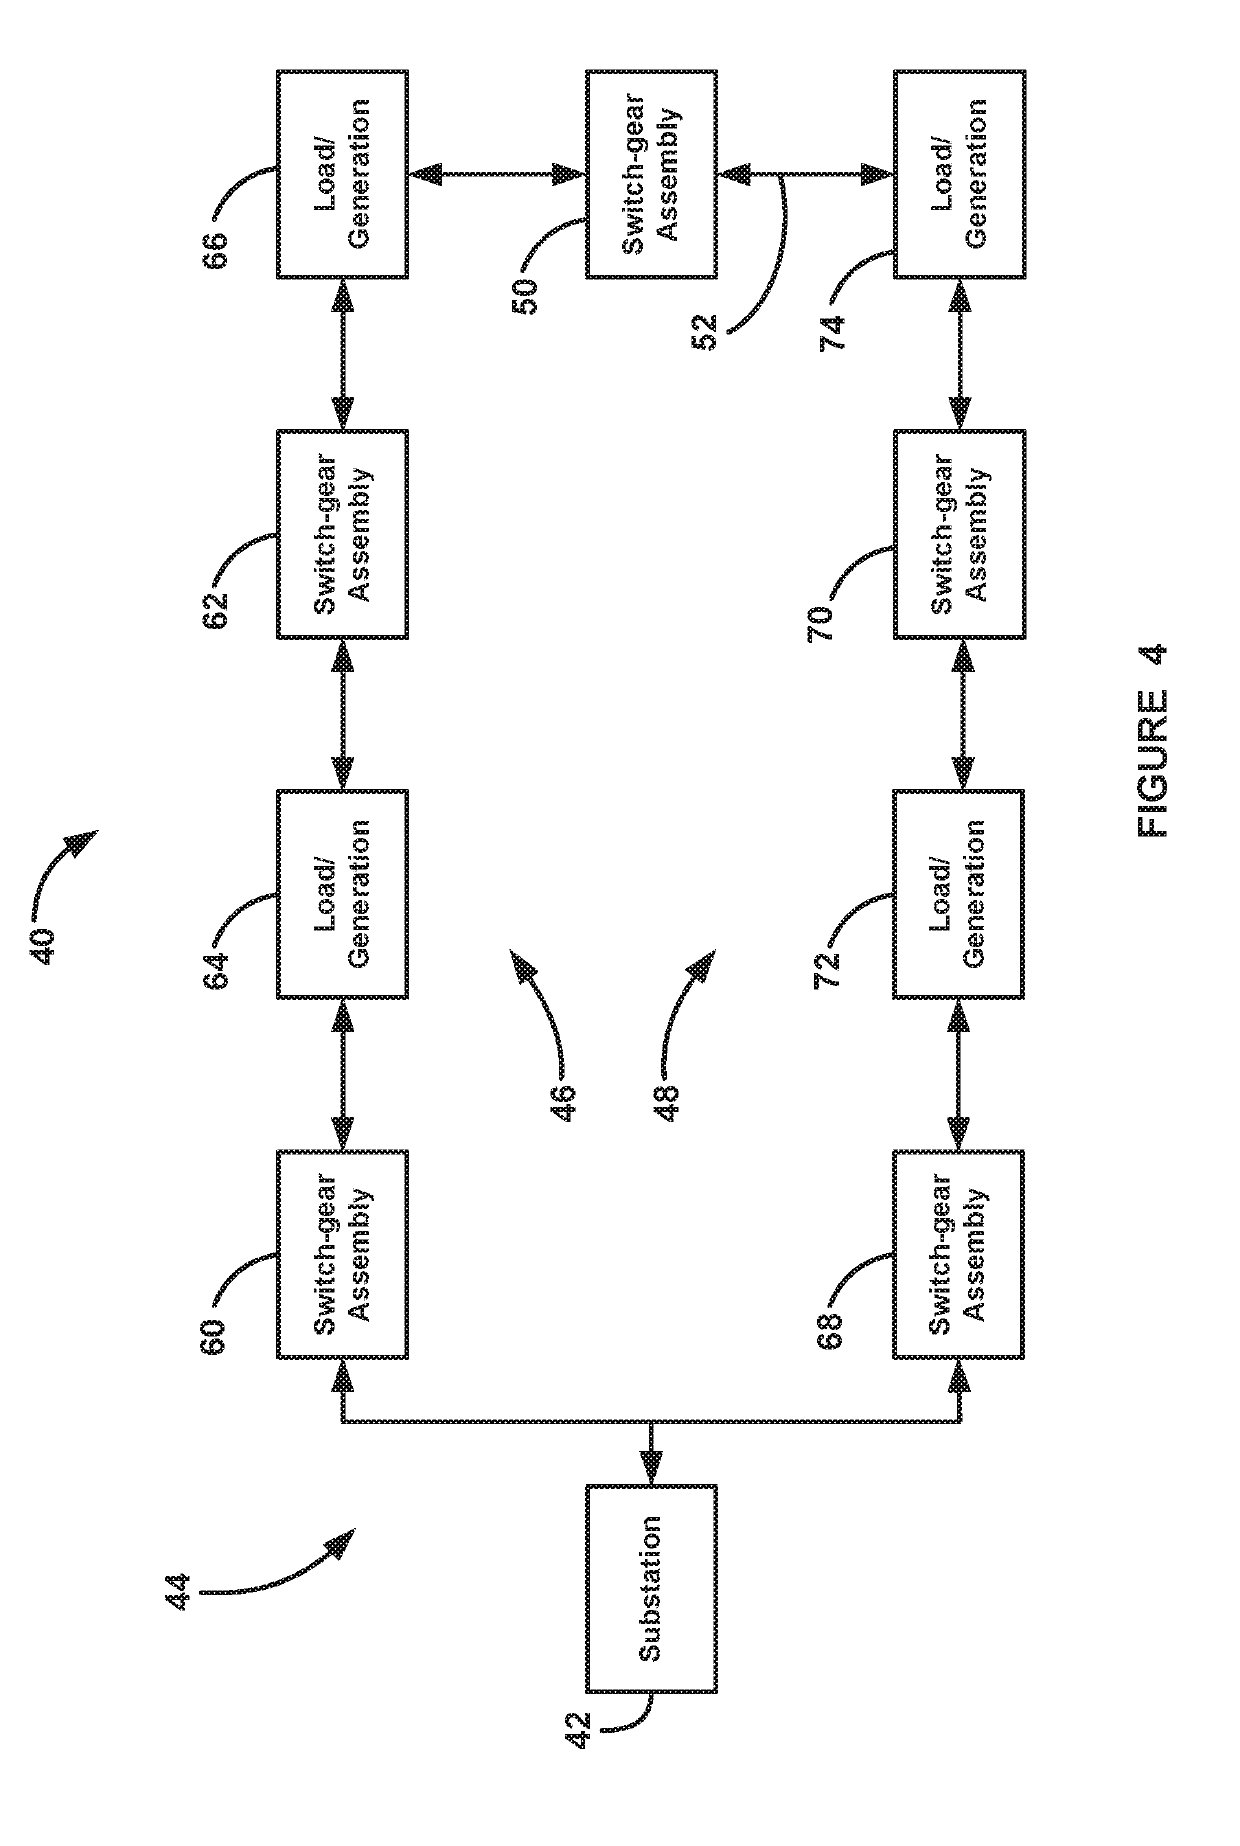 Coordinated frequency load shedding protection method using distributed electrical protection devices